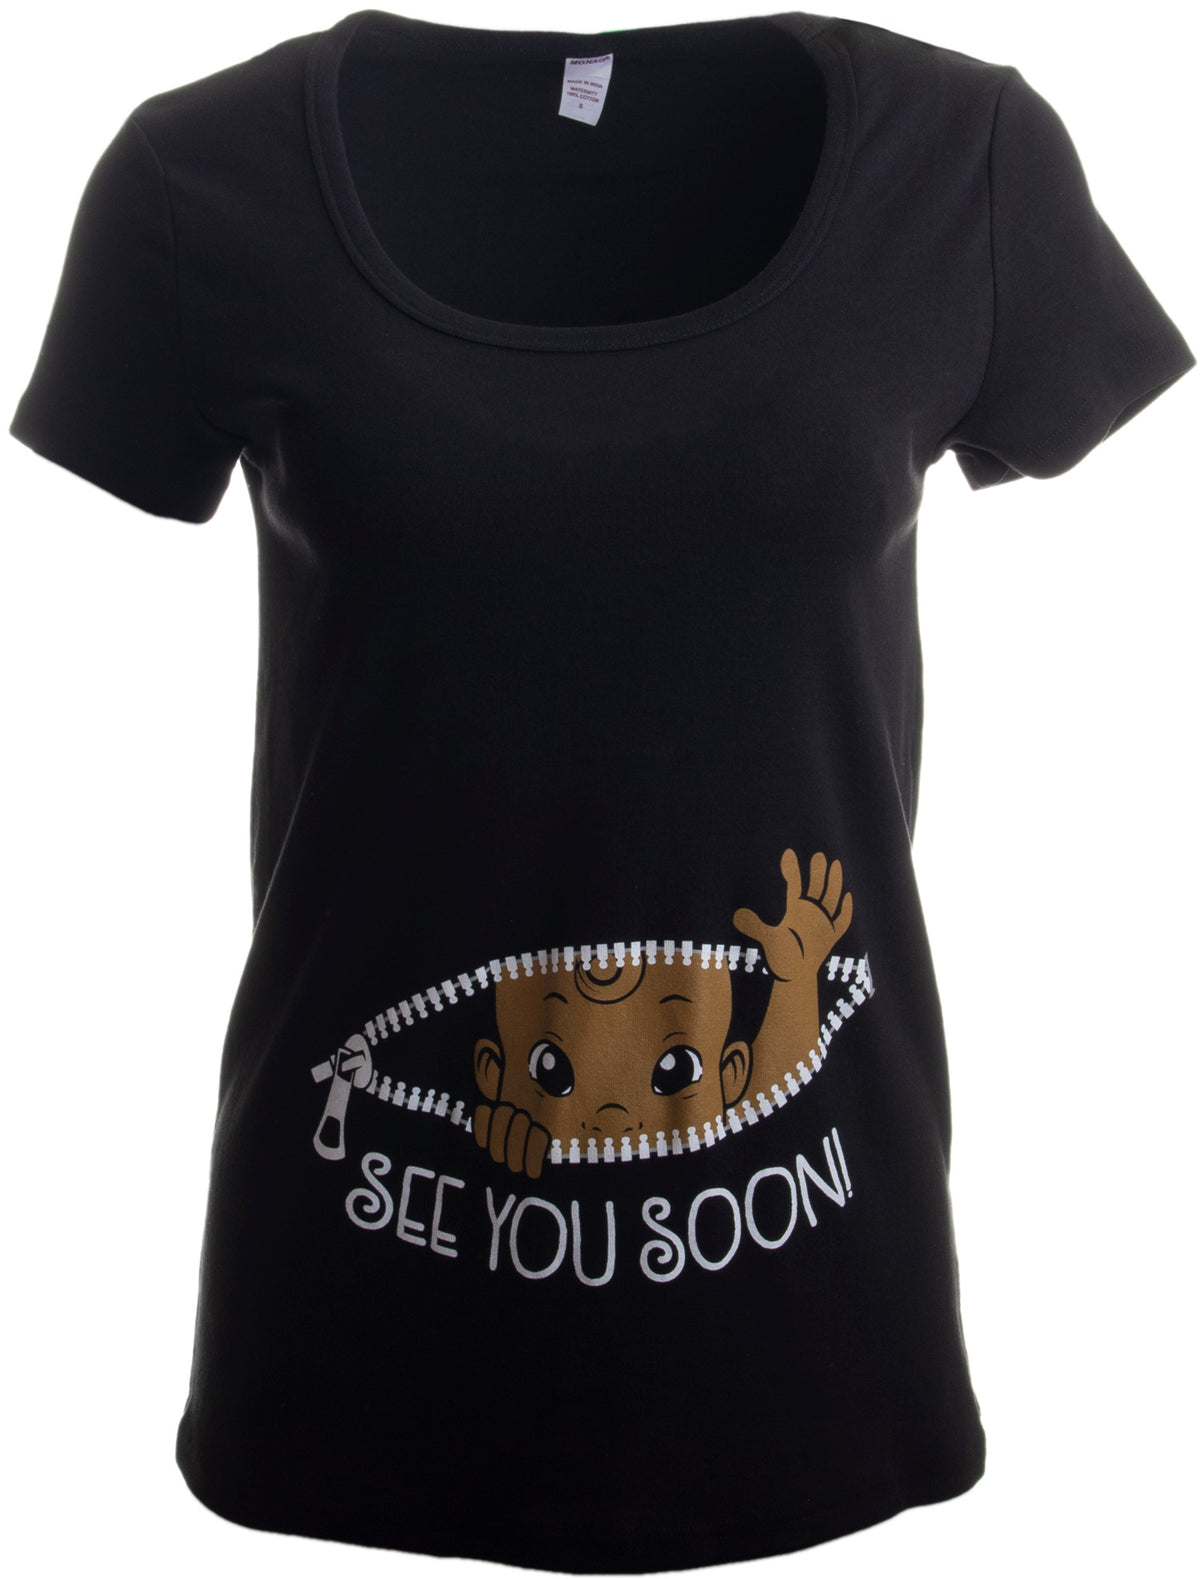 "See You Soon!" - Brown Skin Baby - Cute Funny Maternity Top, Pregnancy T-shirt - Women's